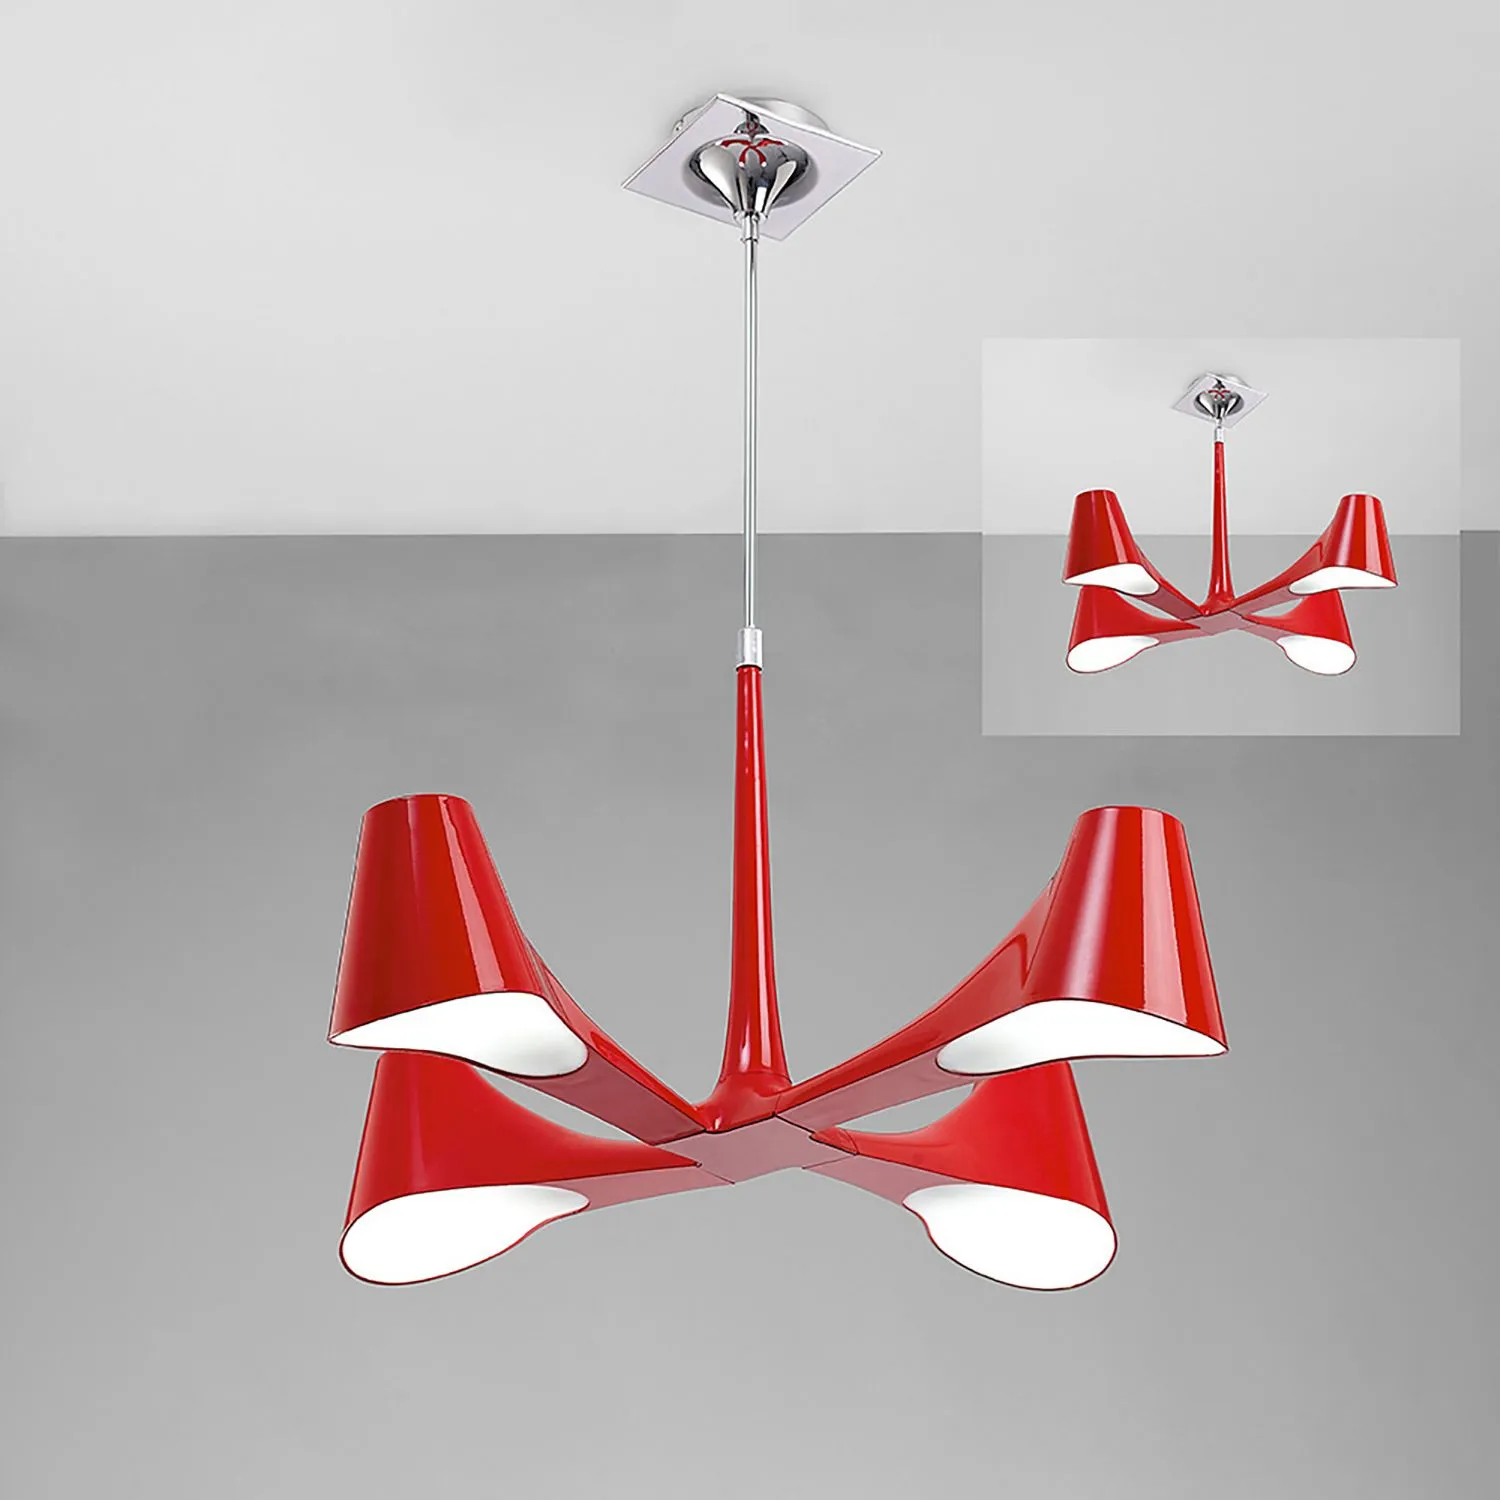 Ora Telescopic Convertible To Semi Flush 4 Light E27, Gloss Red White Acrylic Polished Chrome, CFL Lamps INCLUDED